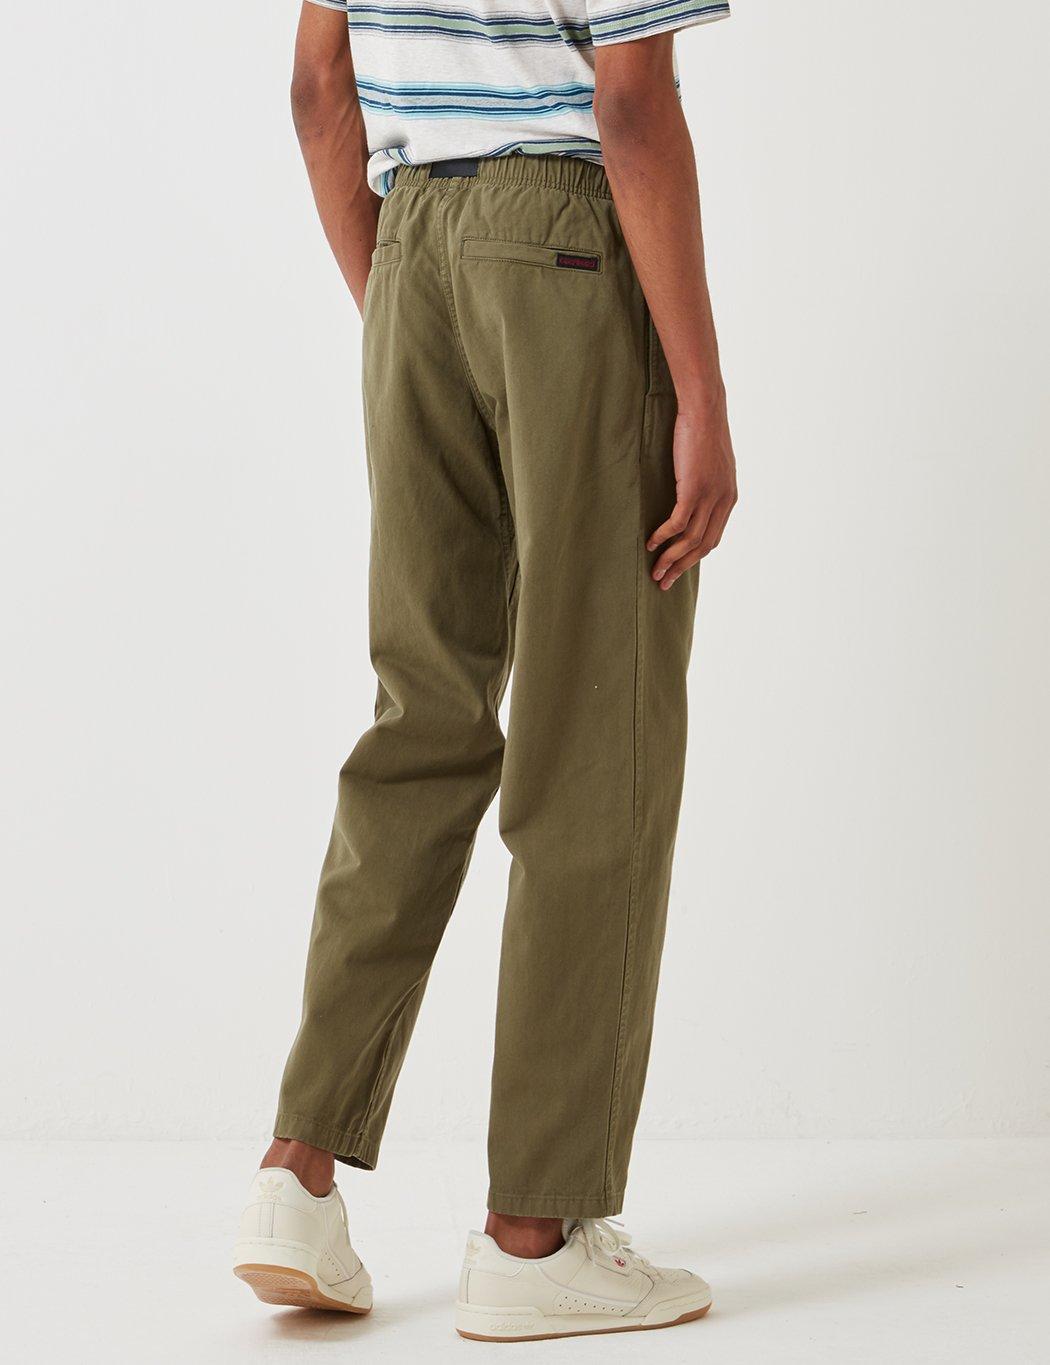 Gramicci Original Fit G Pant (relaxed) in Green for Men - Lyst